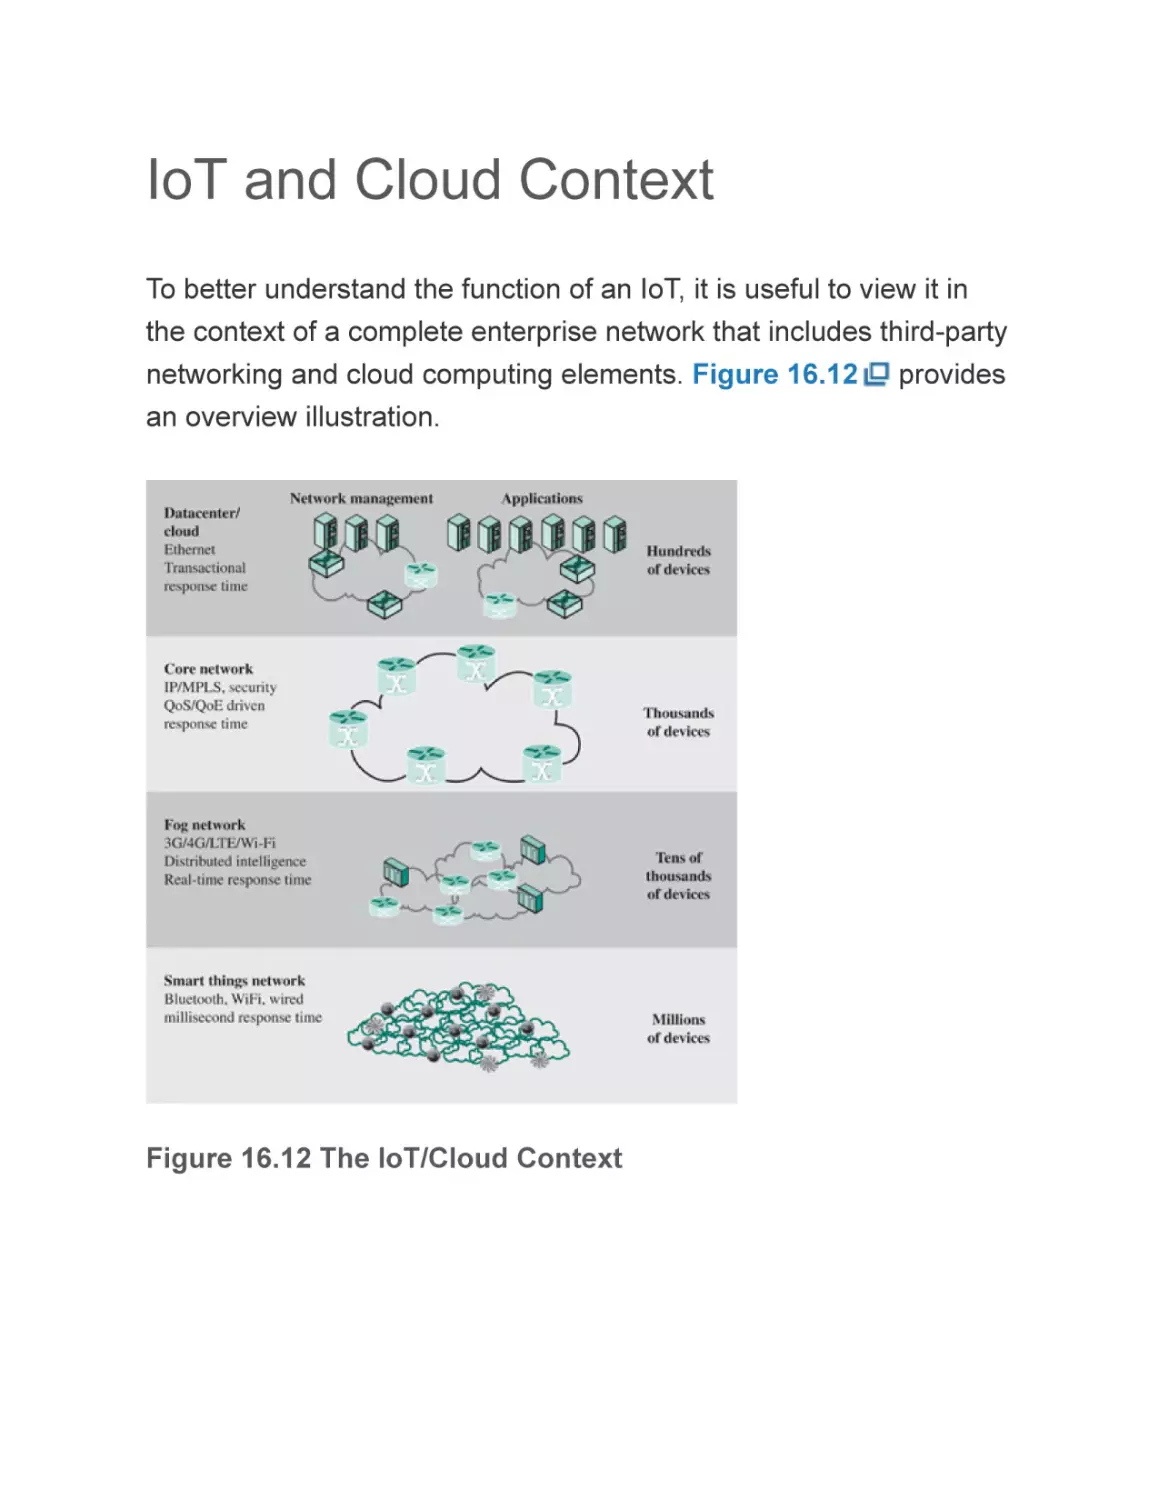 IoT and Cloud Context